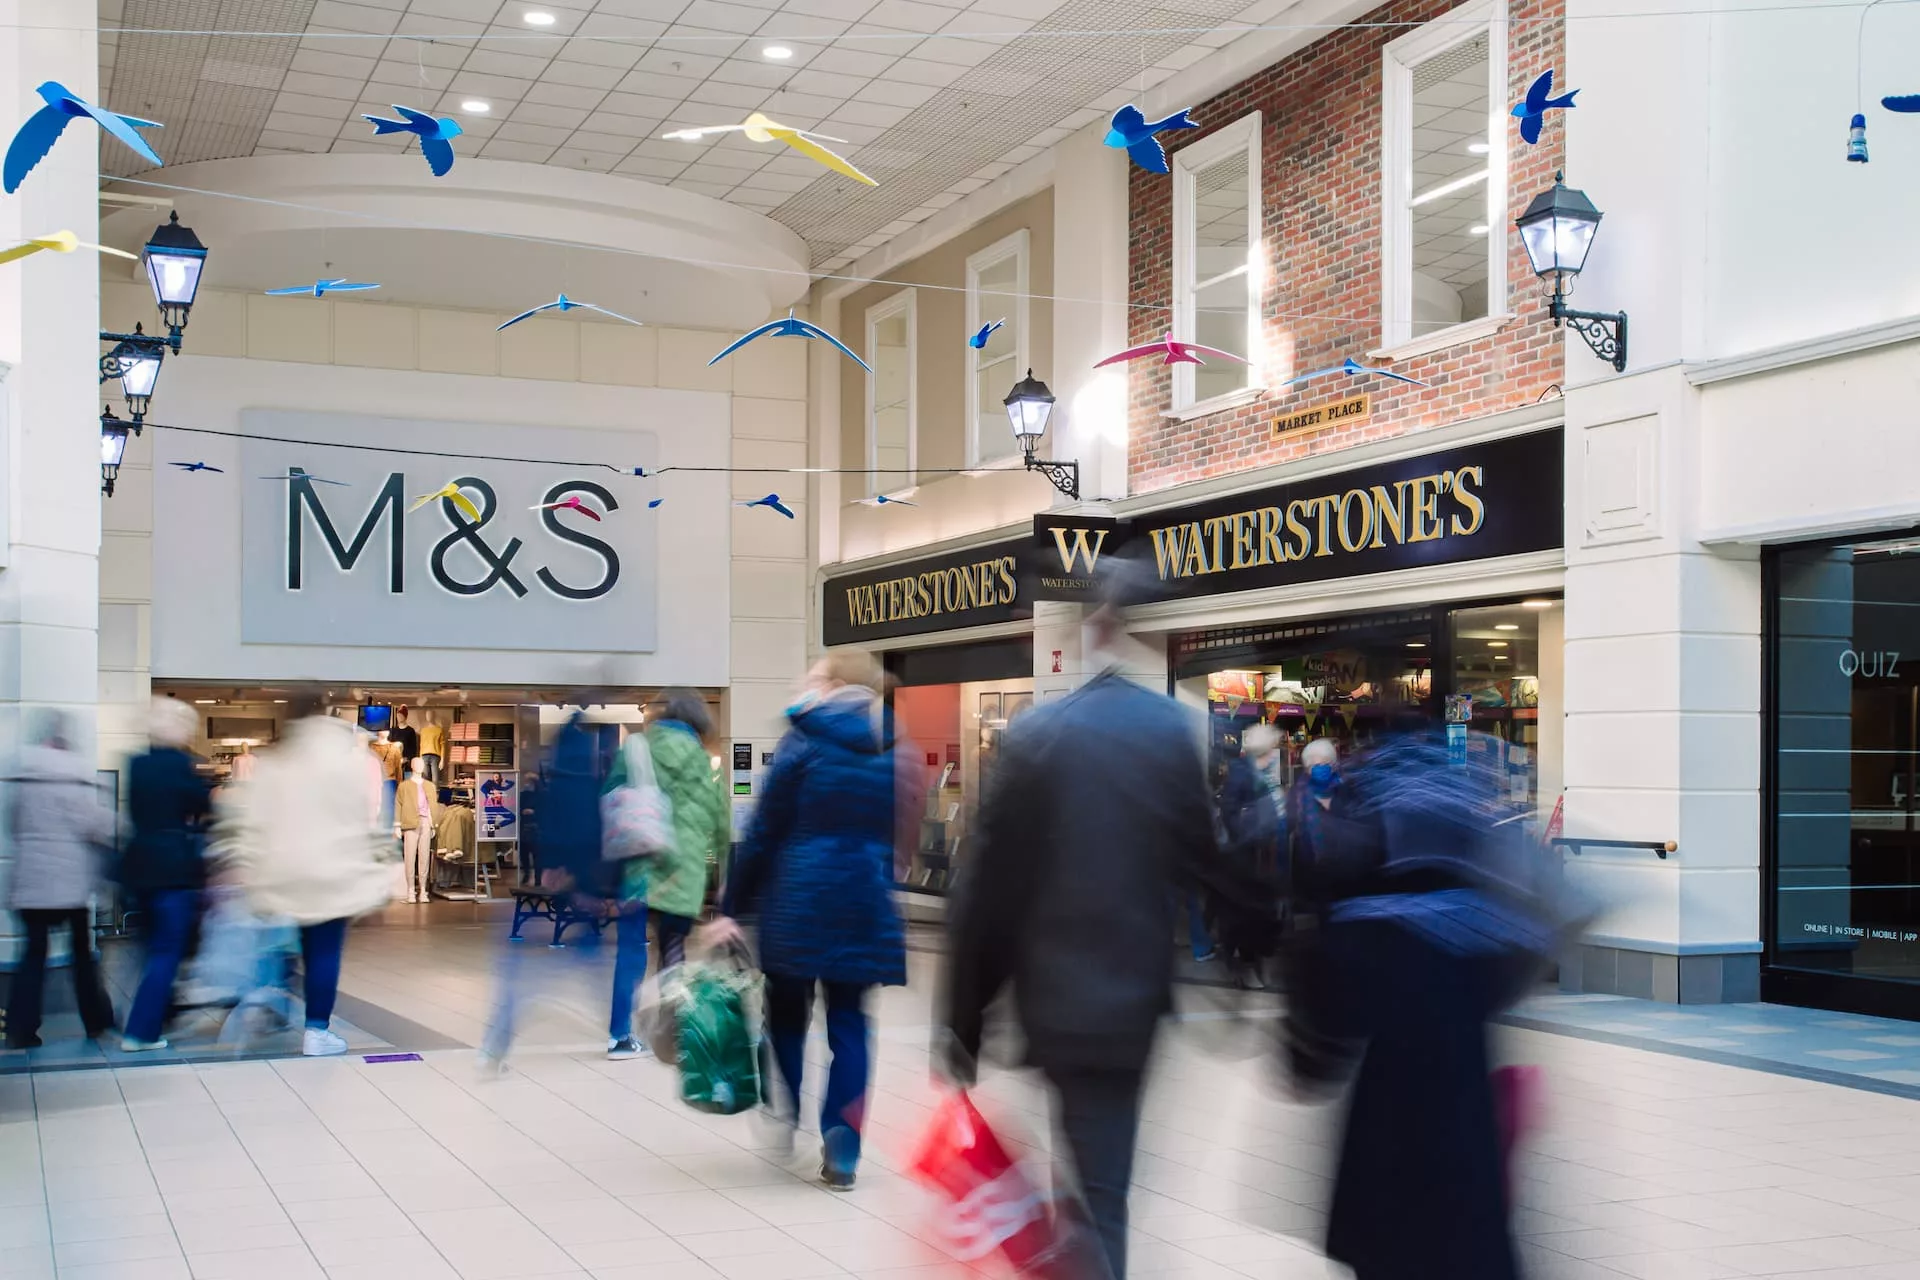 An interior shot of the main mall in Fairhill Shopping Centre showing M&S and Waterstones